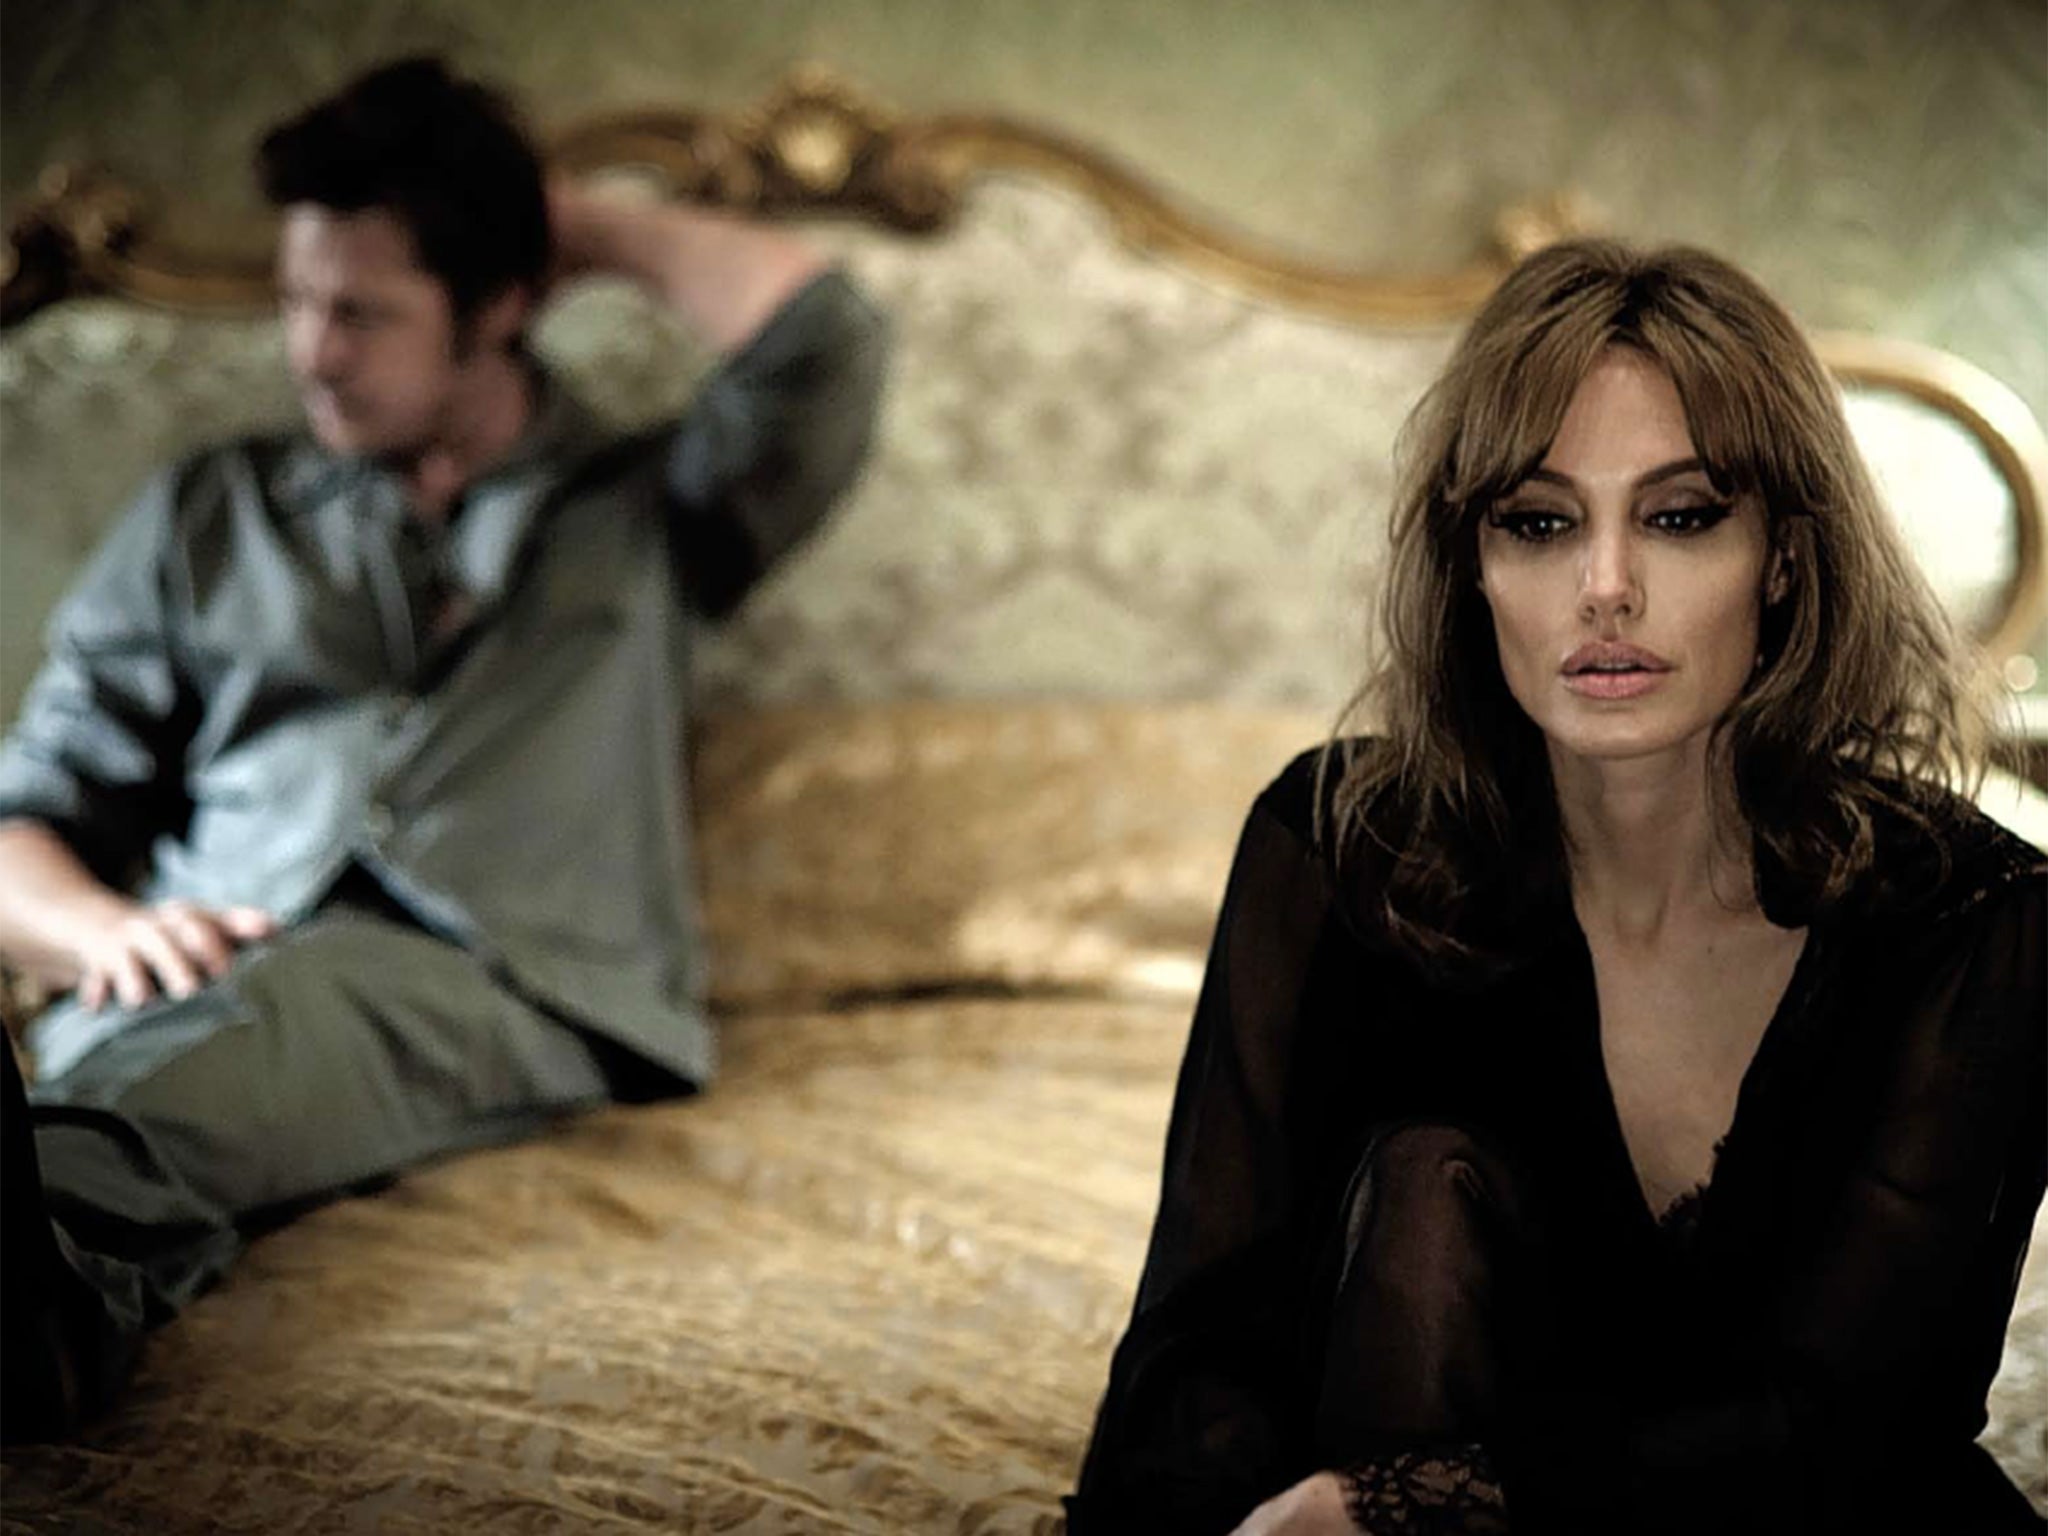 Love don’t live here anymore: Brad Pitt and Angelina Jolie Pitt in ‘By the Sea’